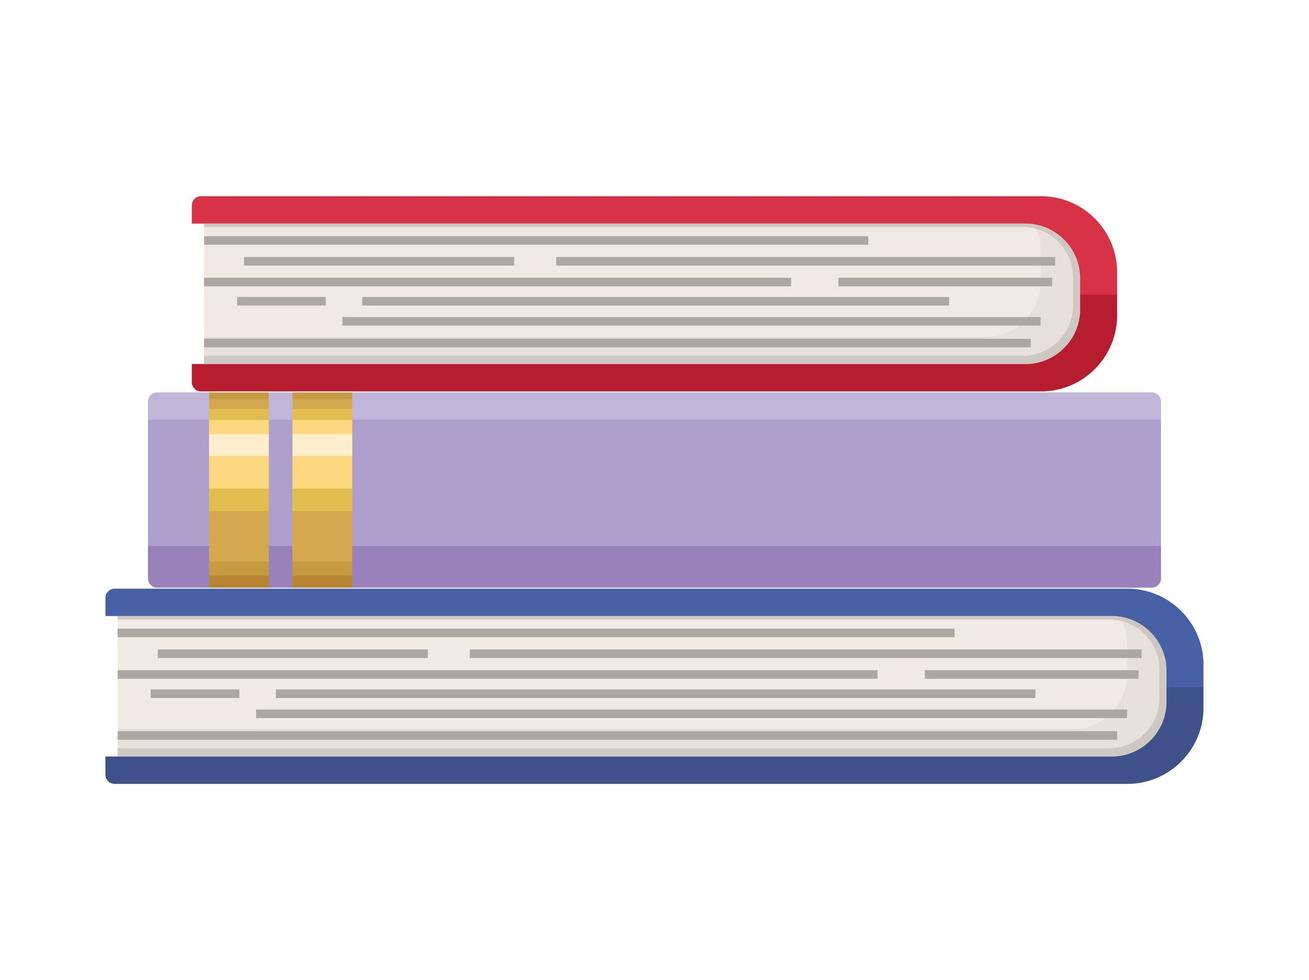 stack of books vector